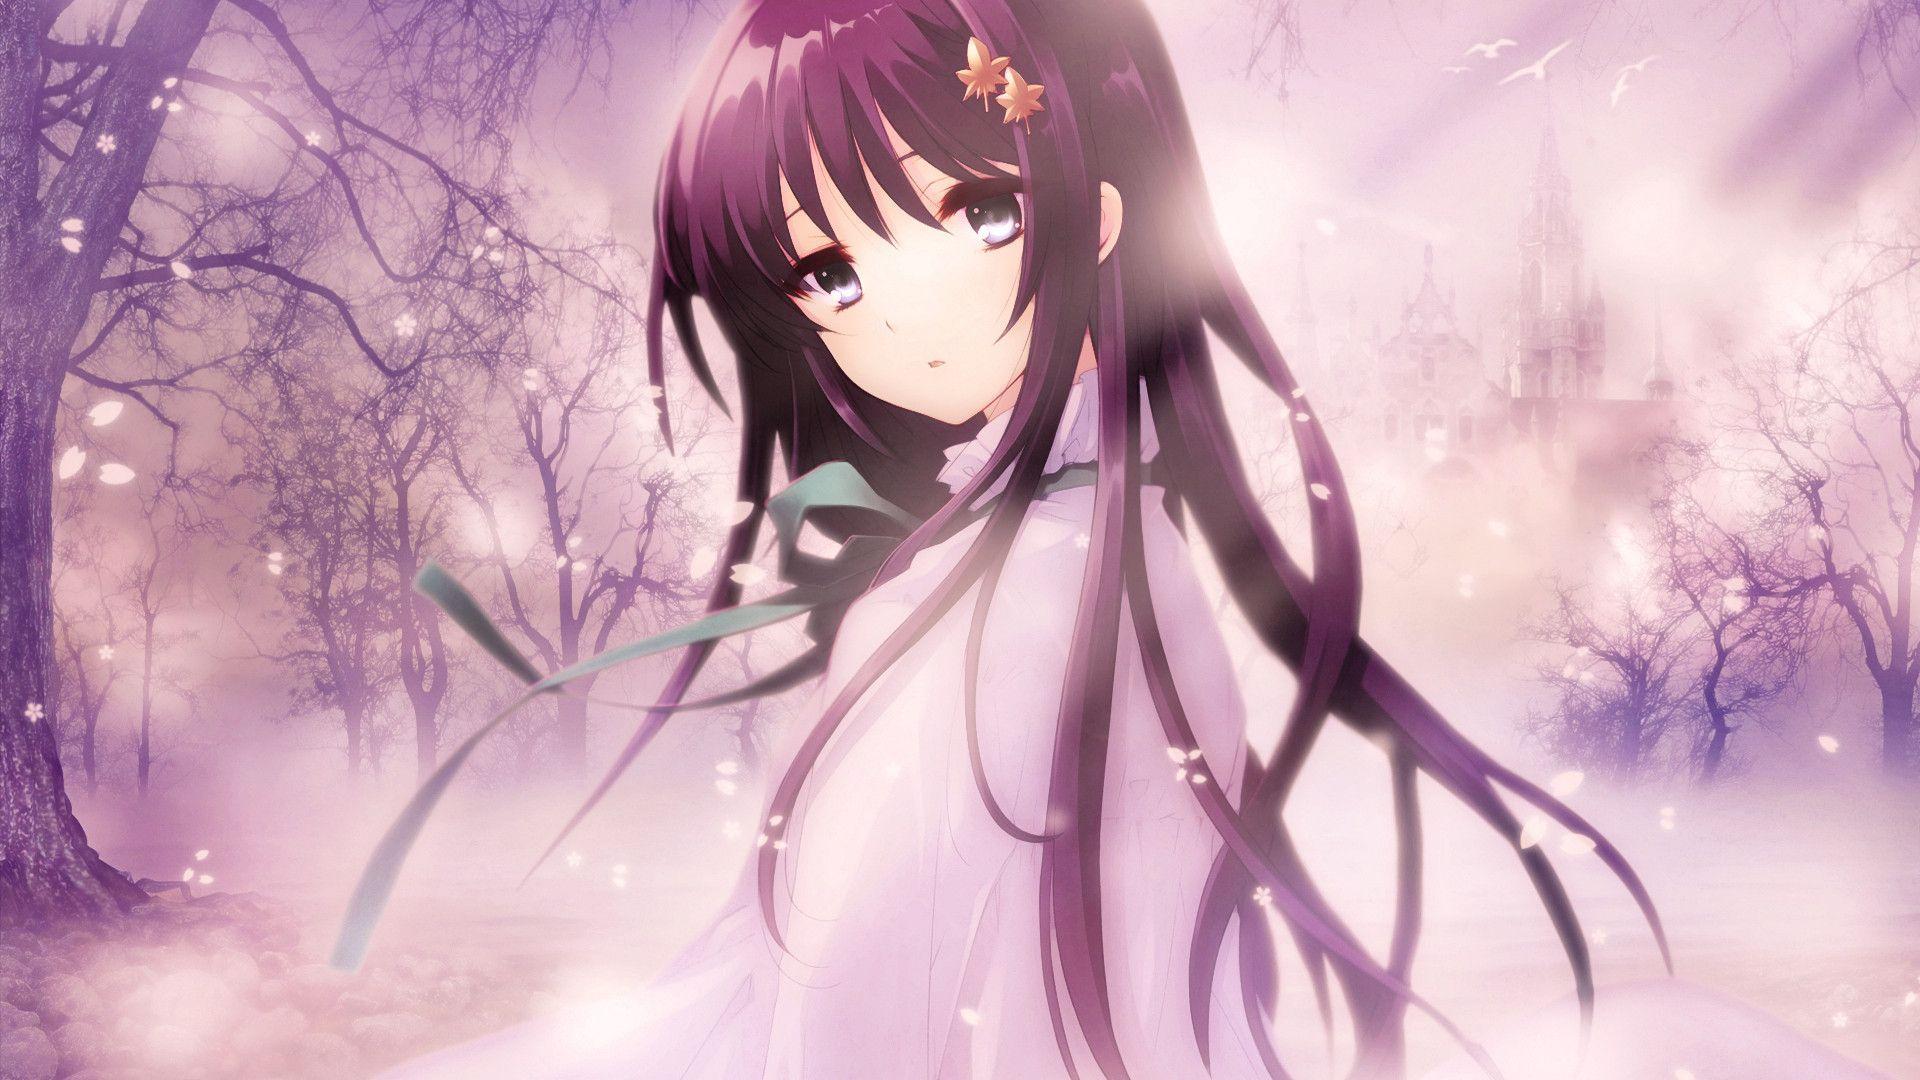 Anime Cute Angels Background Misty 1280x1024px high quality